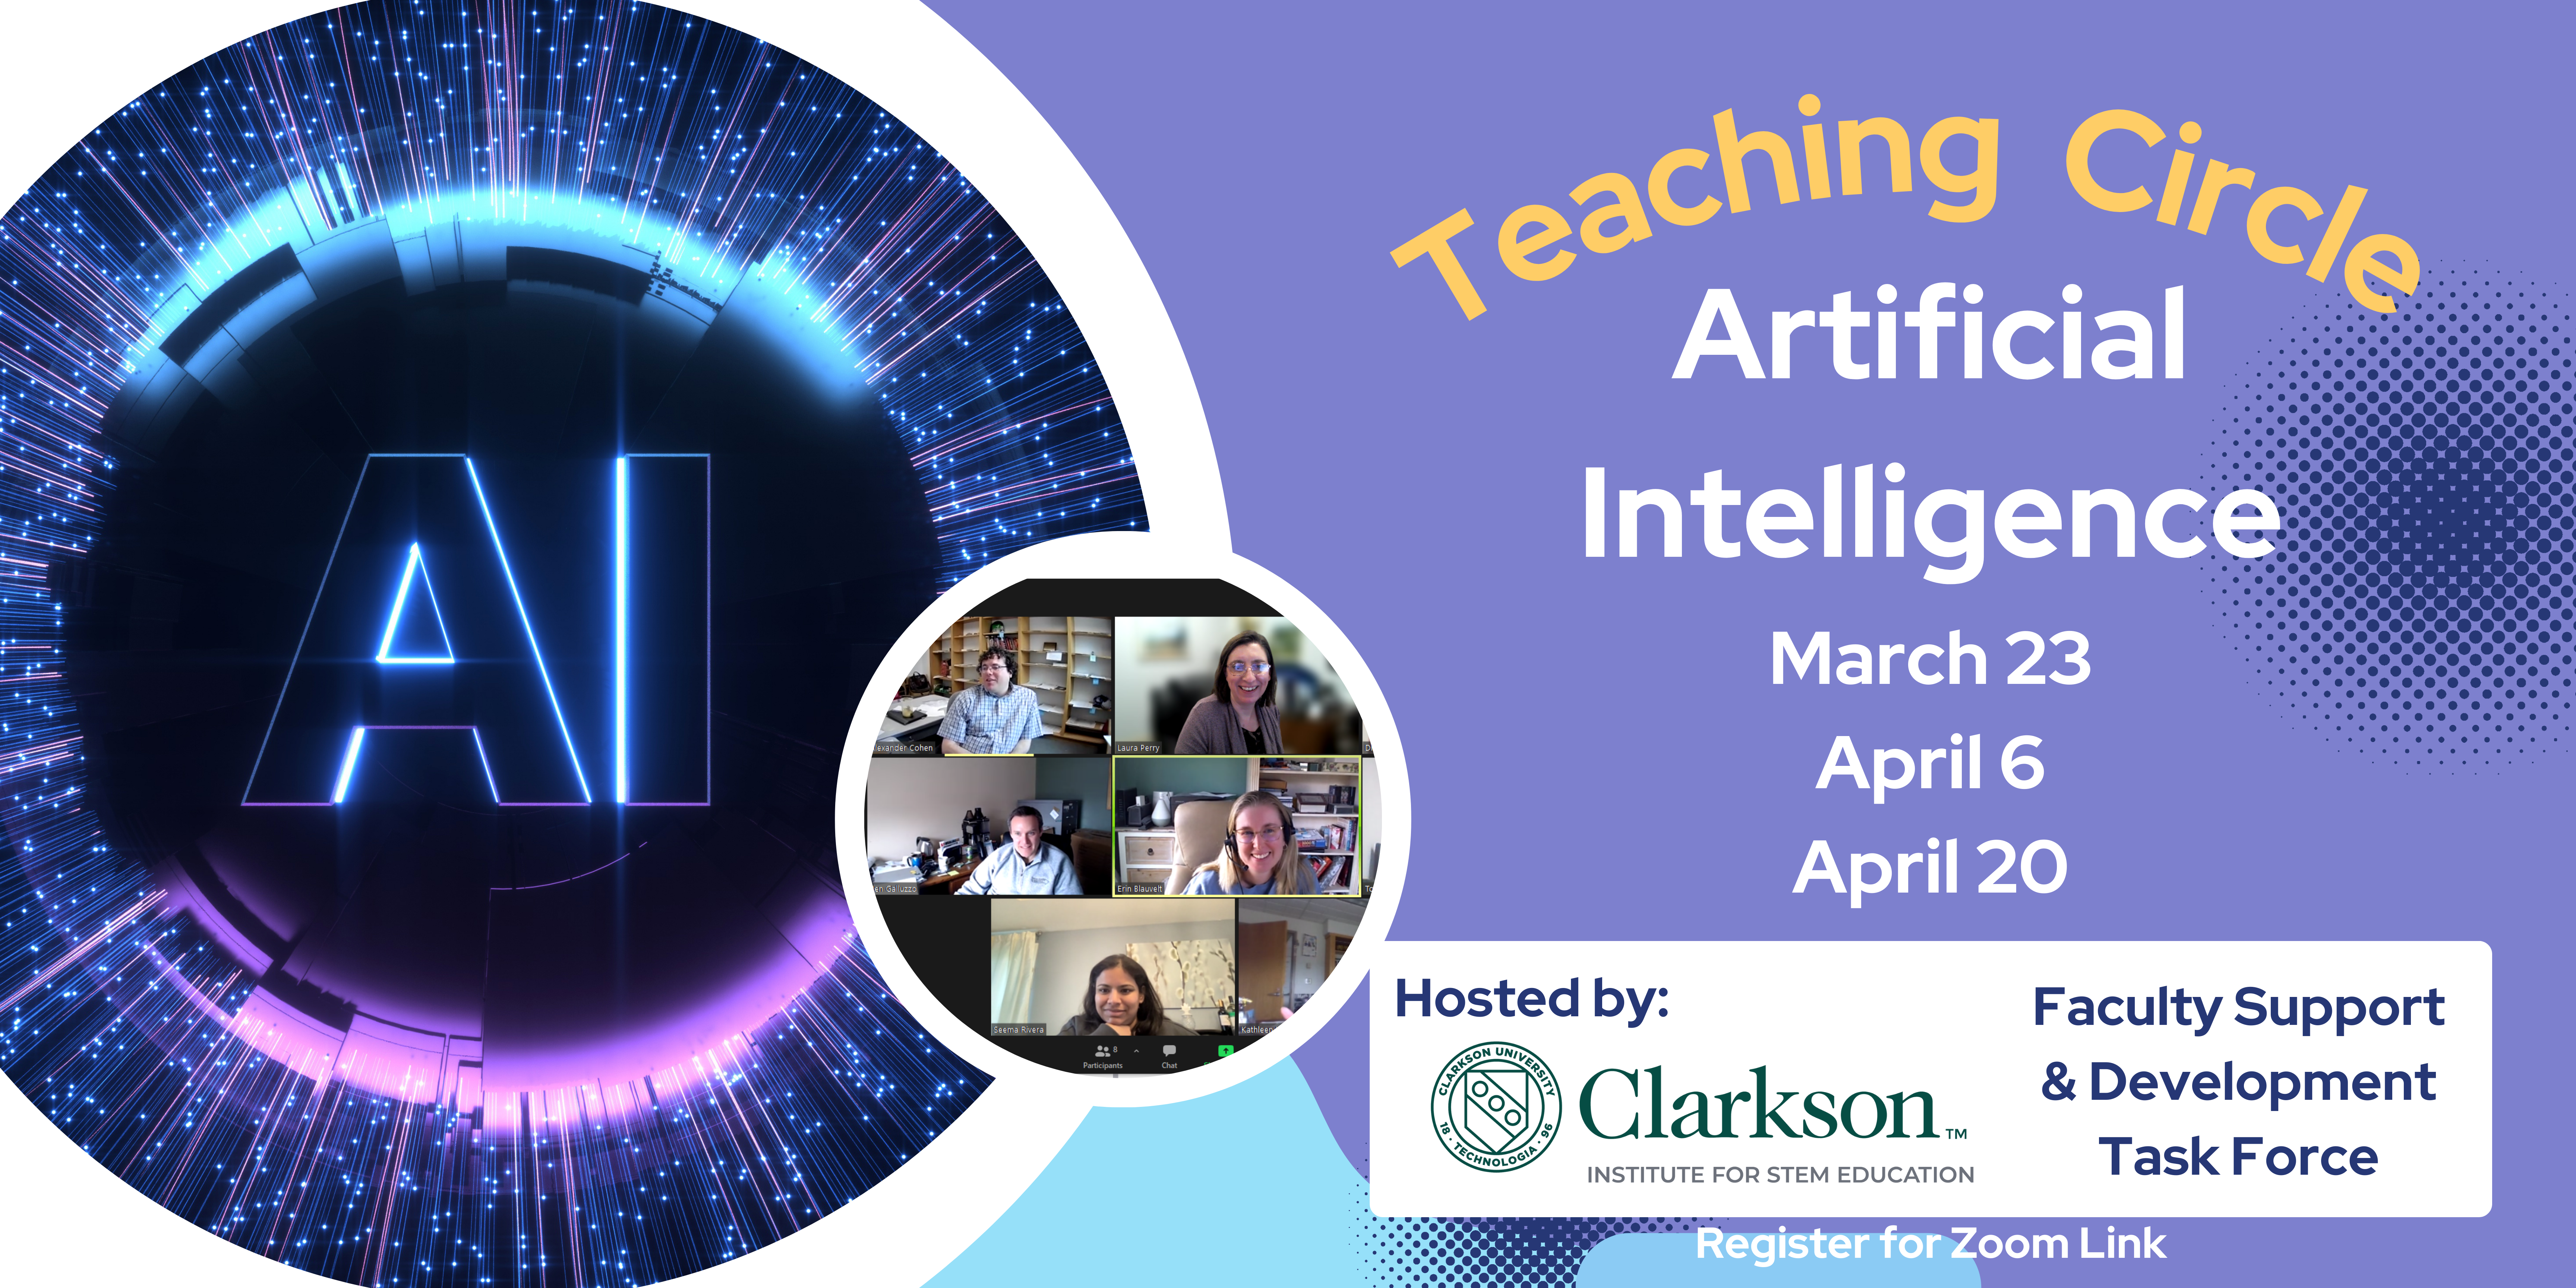 Teaching Circle Artificial Intelligence March 23, April 6, April 20 Hosted by Clarkson University Institute for STEM Education and the Faculty Support Development Task Force